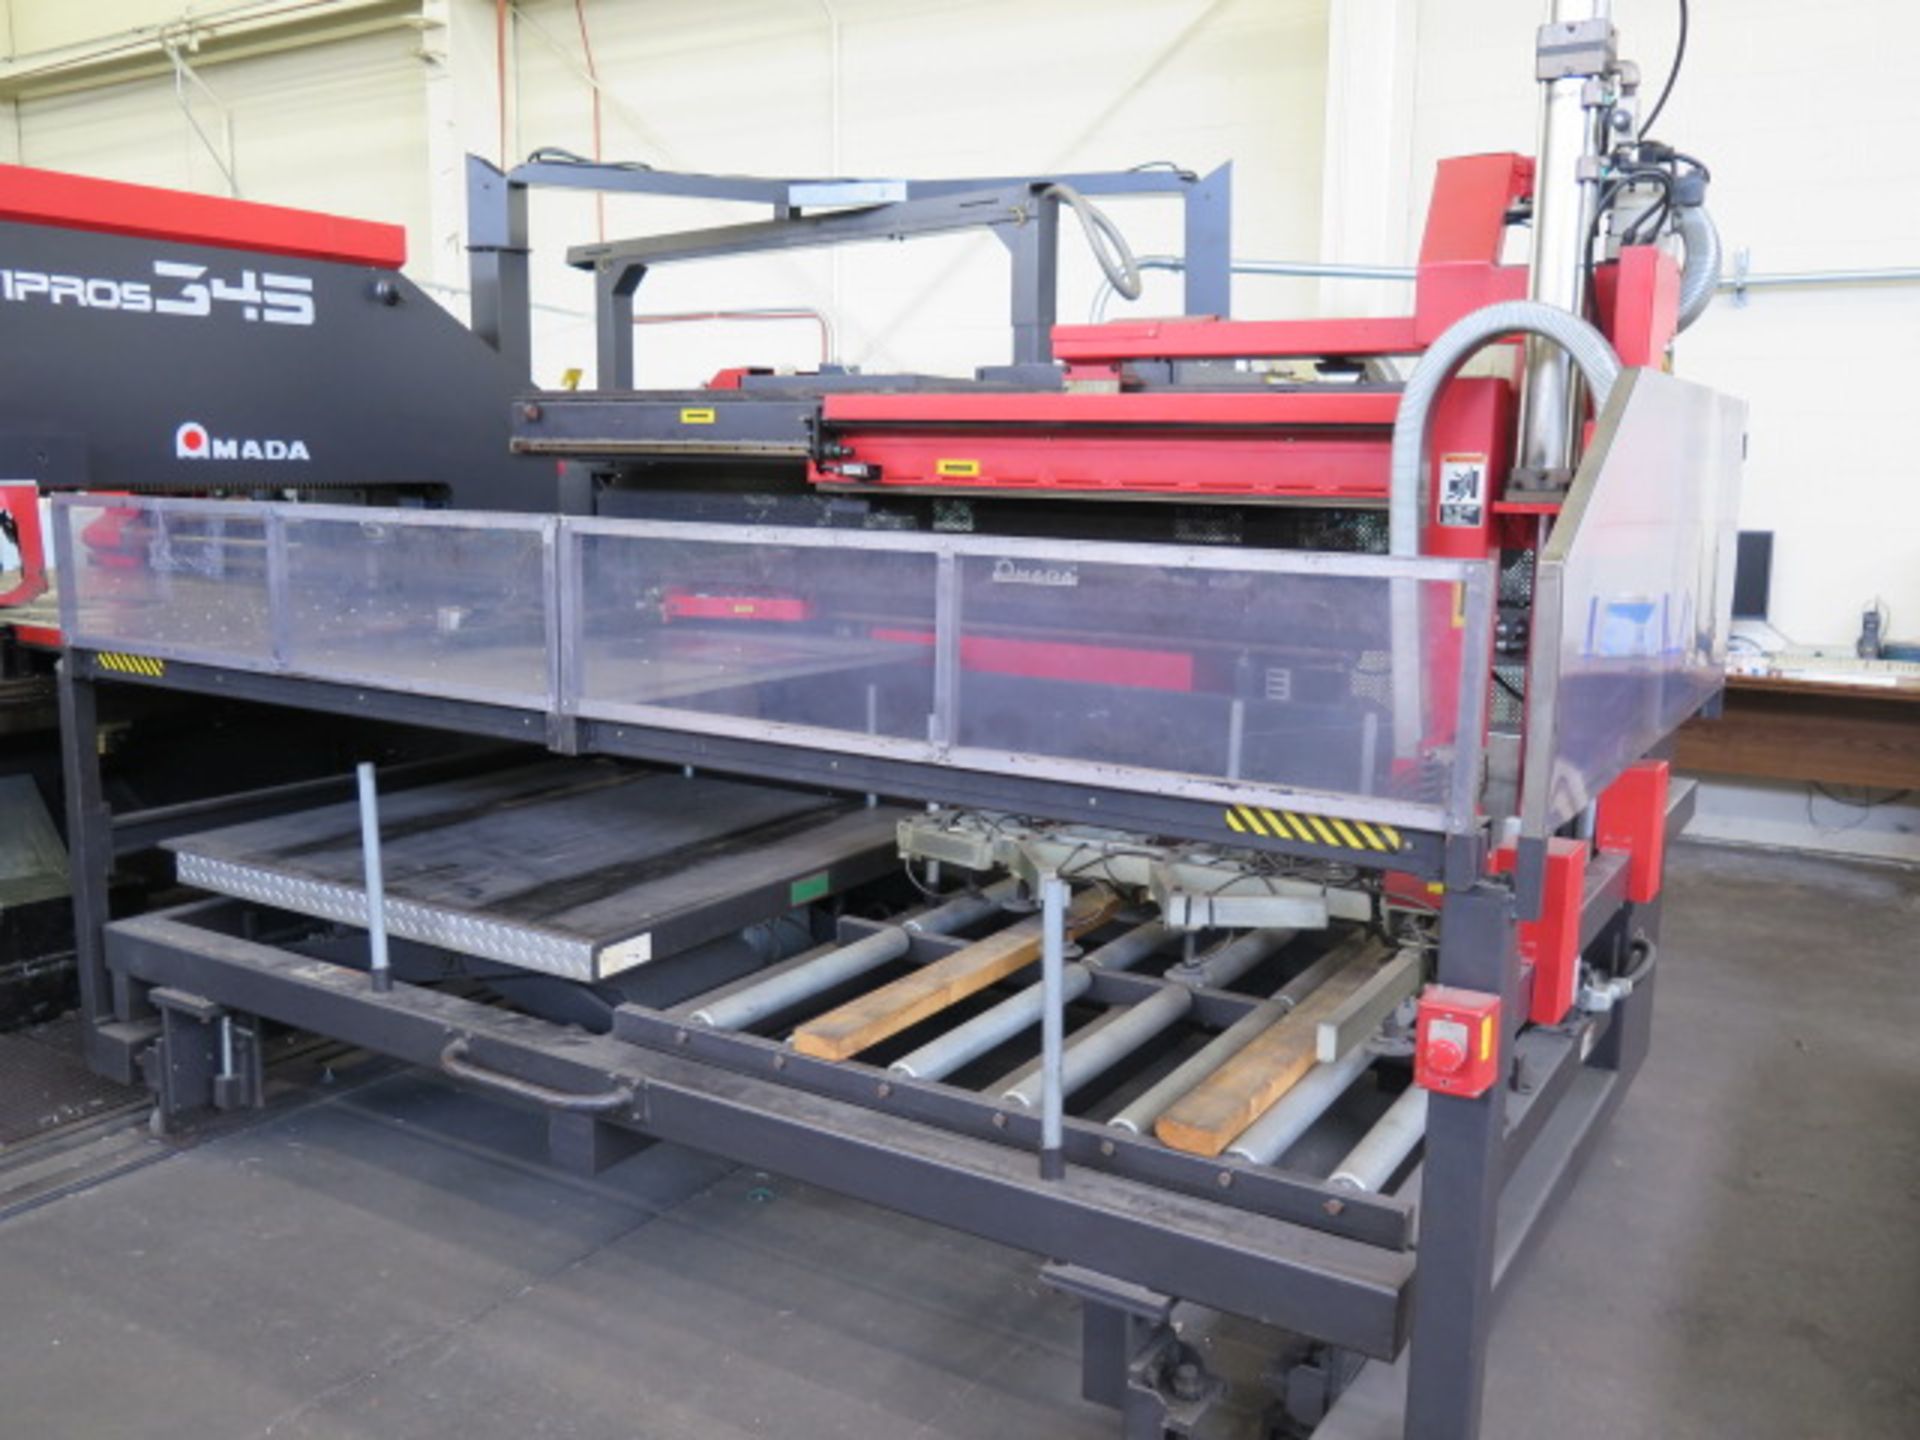 Amada VIPROS 345 30-Ton CNC Turret Punch Cell s/n 34510153 w/ 04P-C Controls, 58-Station, SOLD AS IS - Image 20 of 28